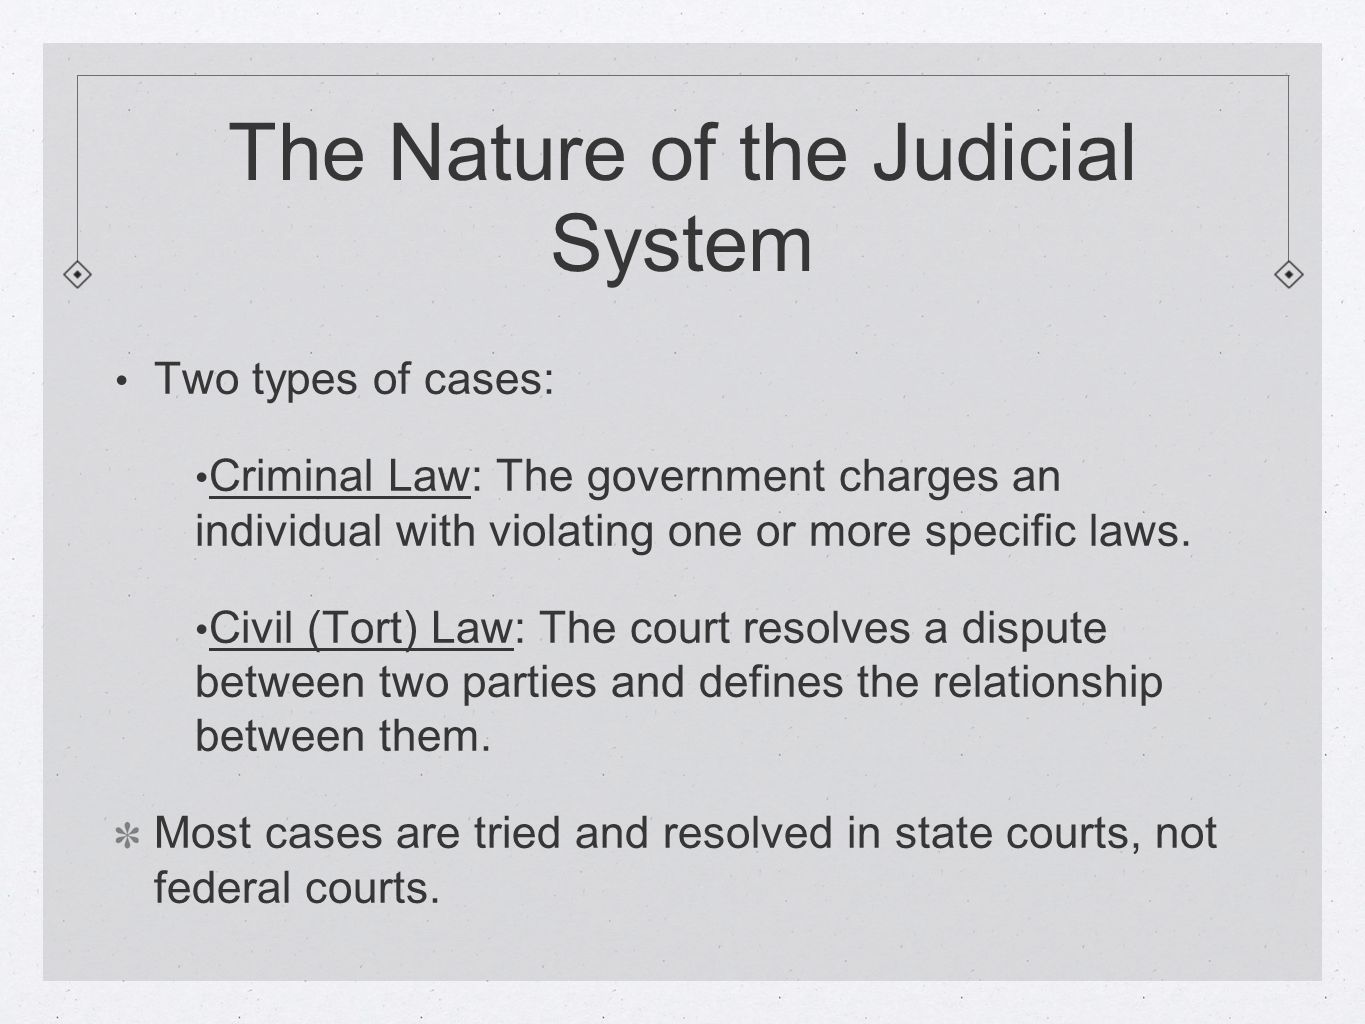 The Nature of the Judicial System